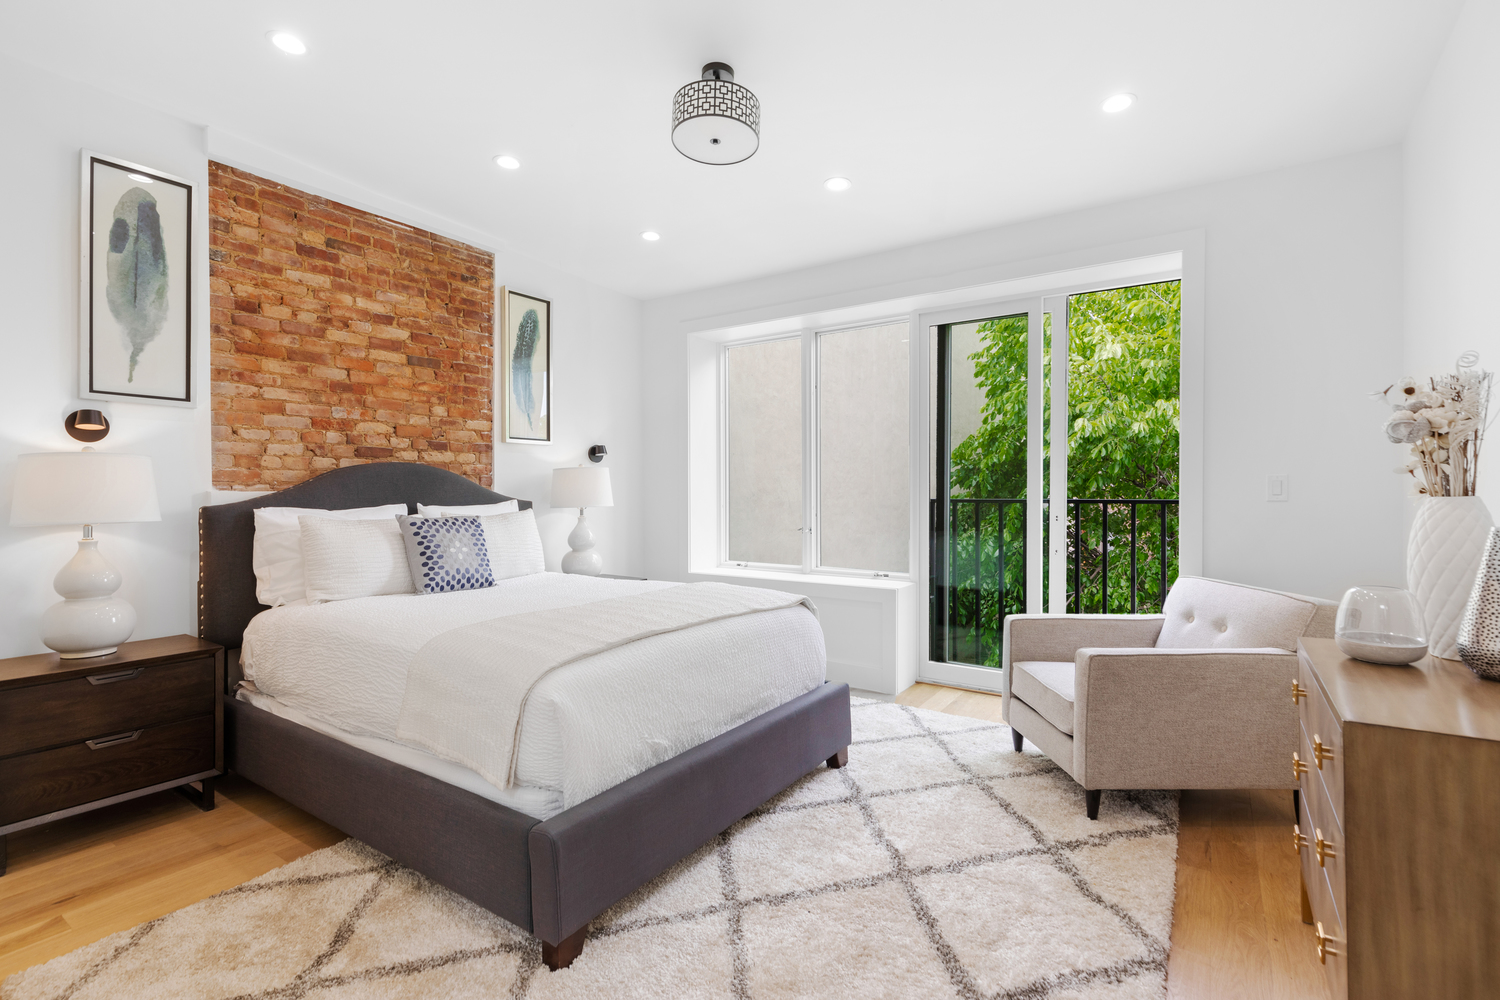 Remodeled bedroom with sliding glass doors and accent brick wall above headboard of bed.